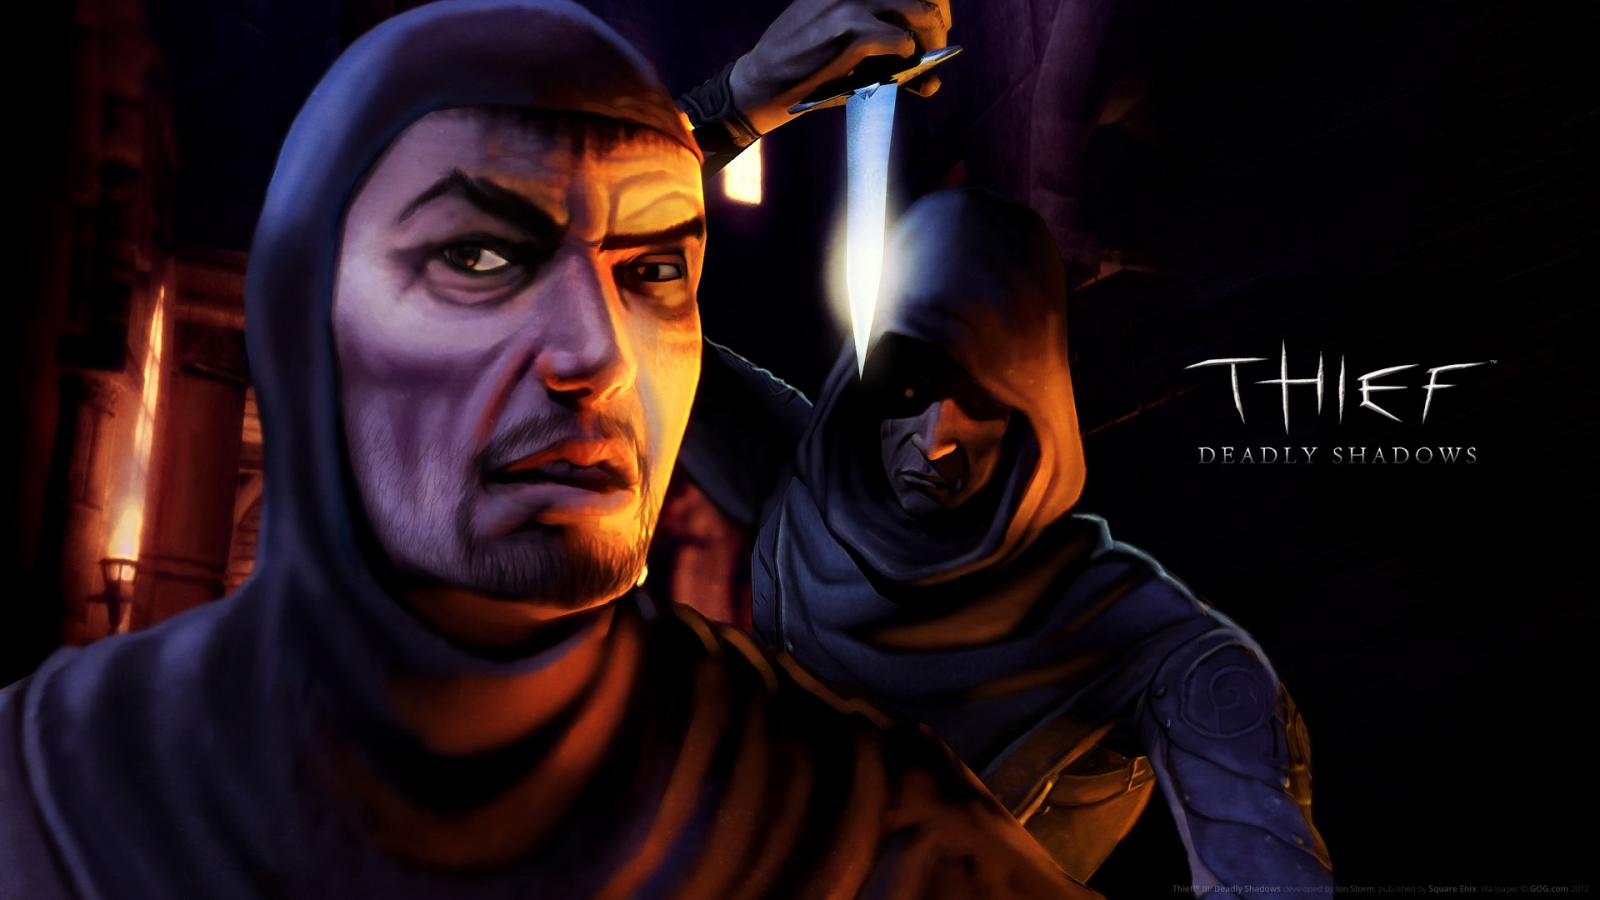 Thief Deadly Shadows for 1600 x 900 HDTV resolution